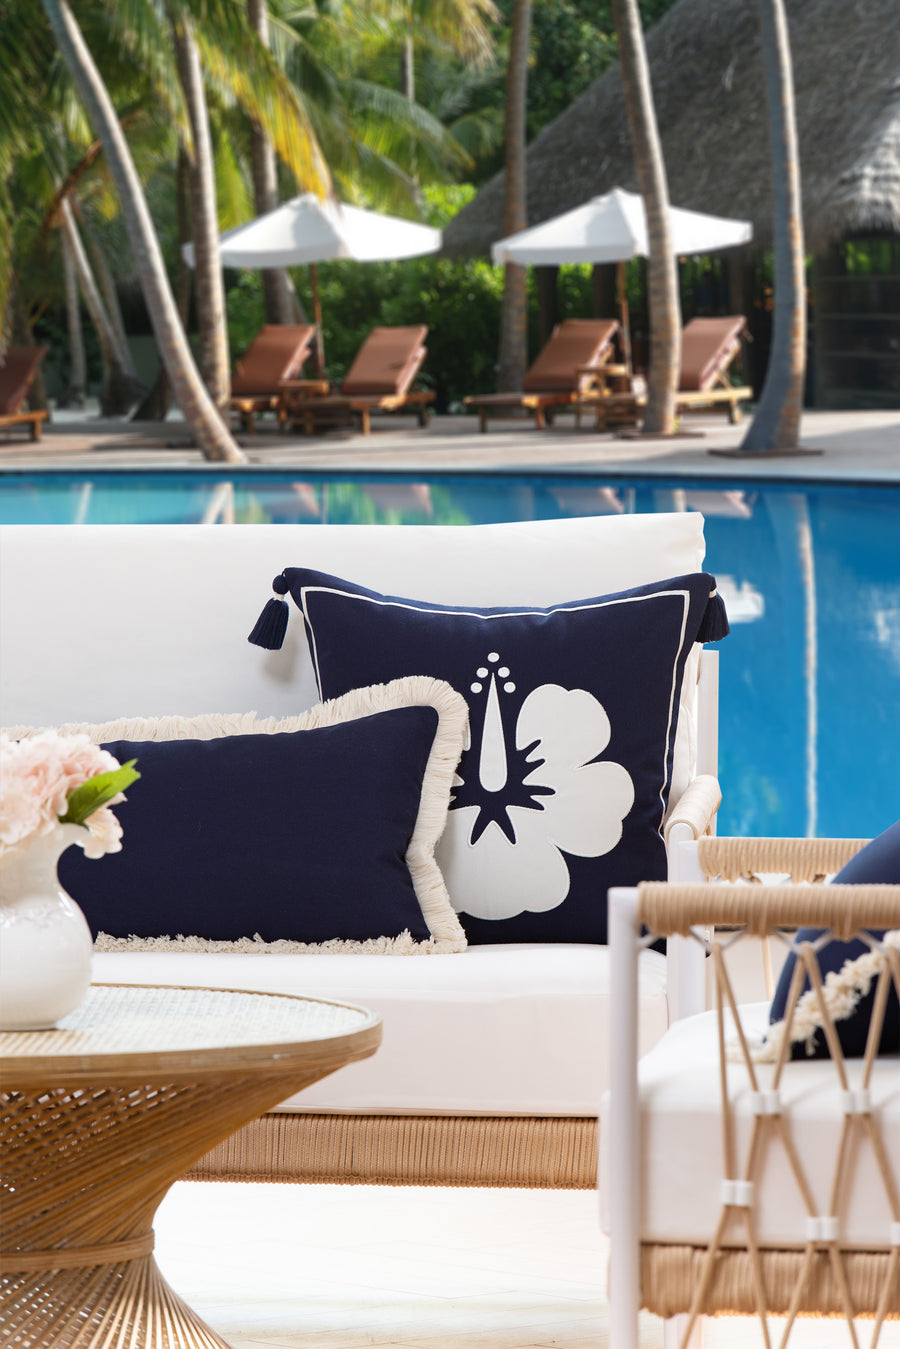 Coastal Outdoor Performance Long Lumbar Pillow Cover, Solid with Fringe, Dark Navy Blue, 12